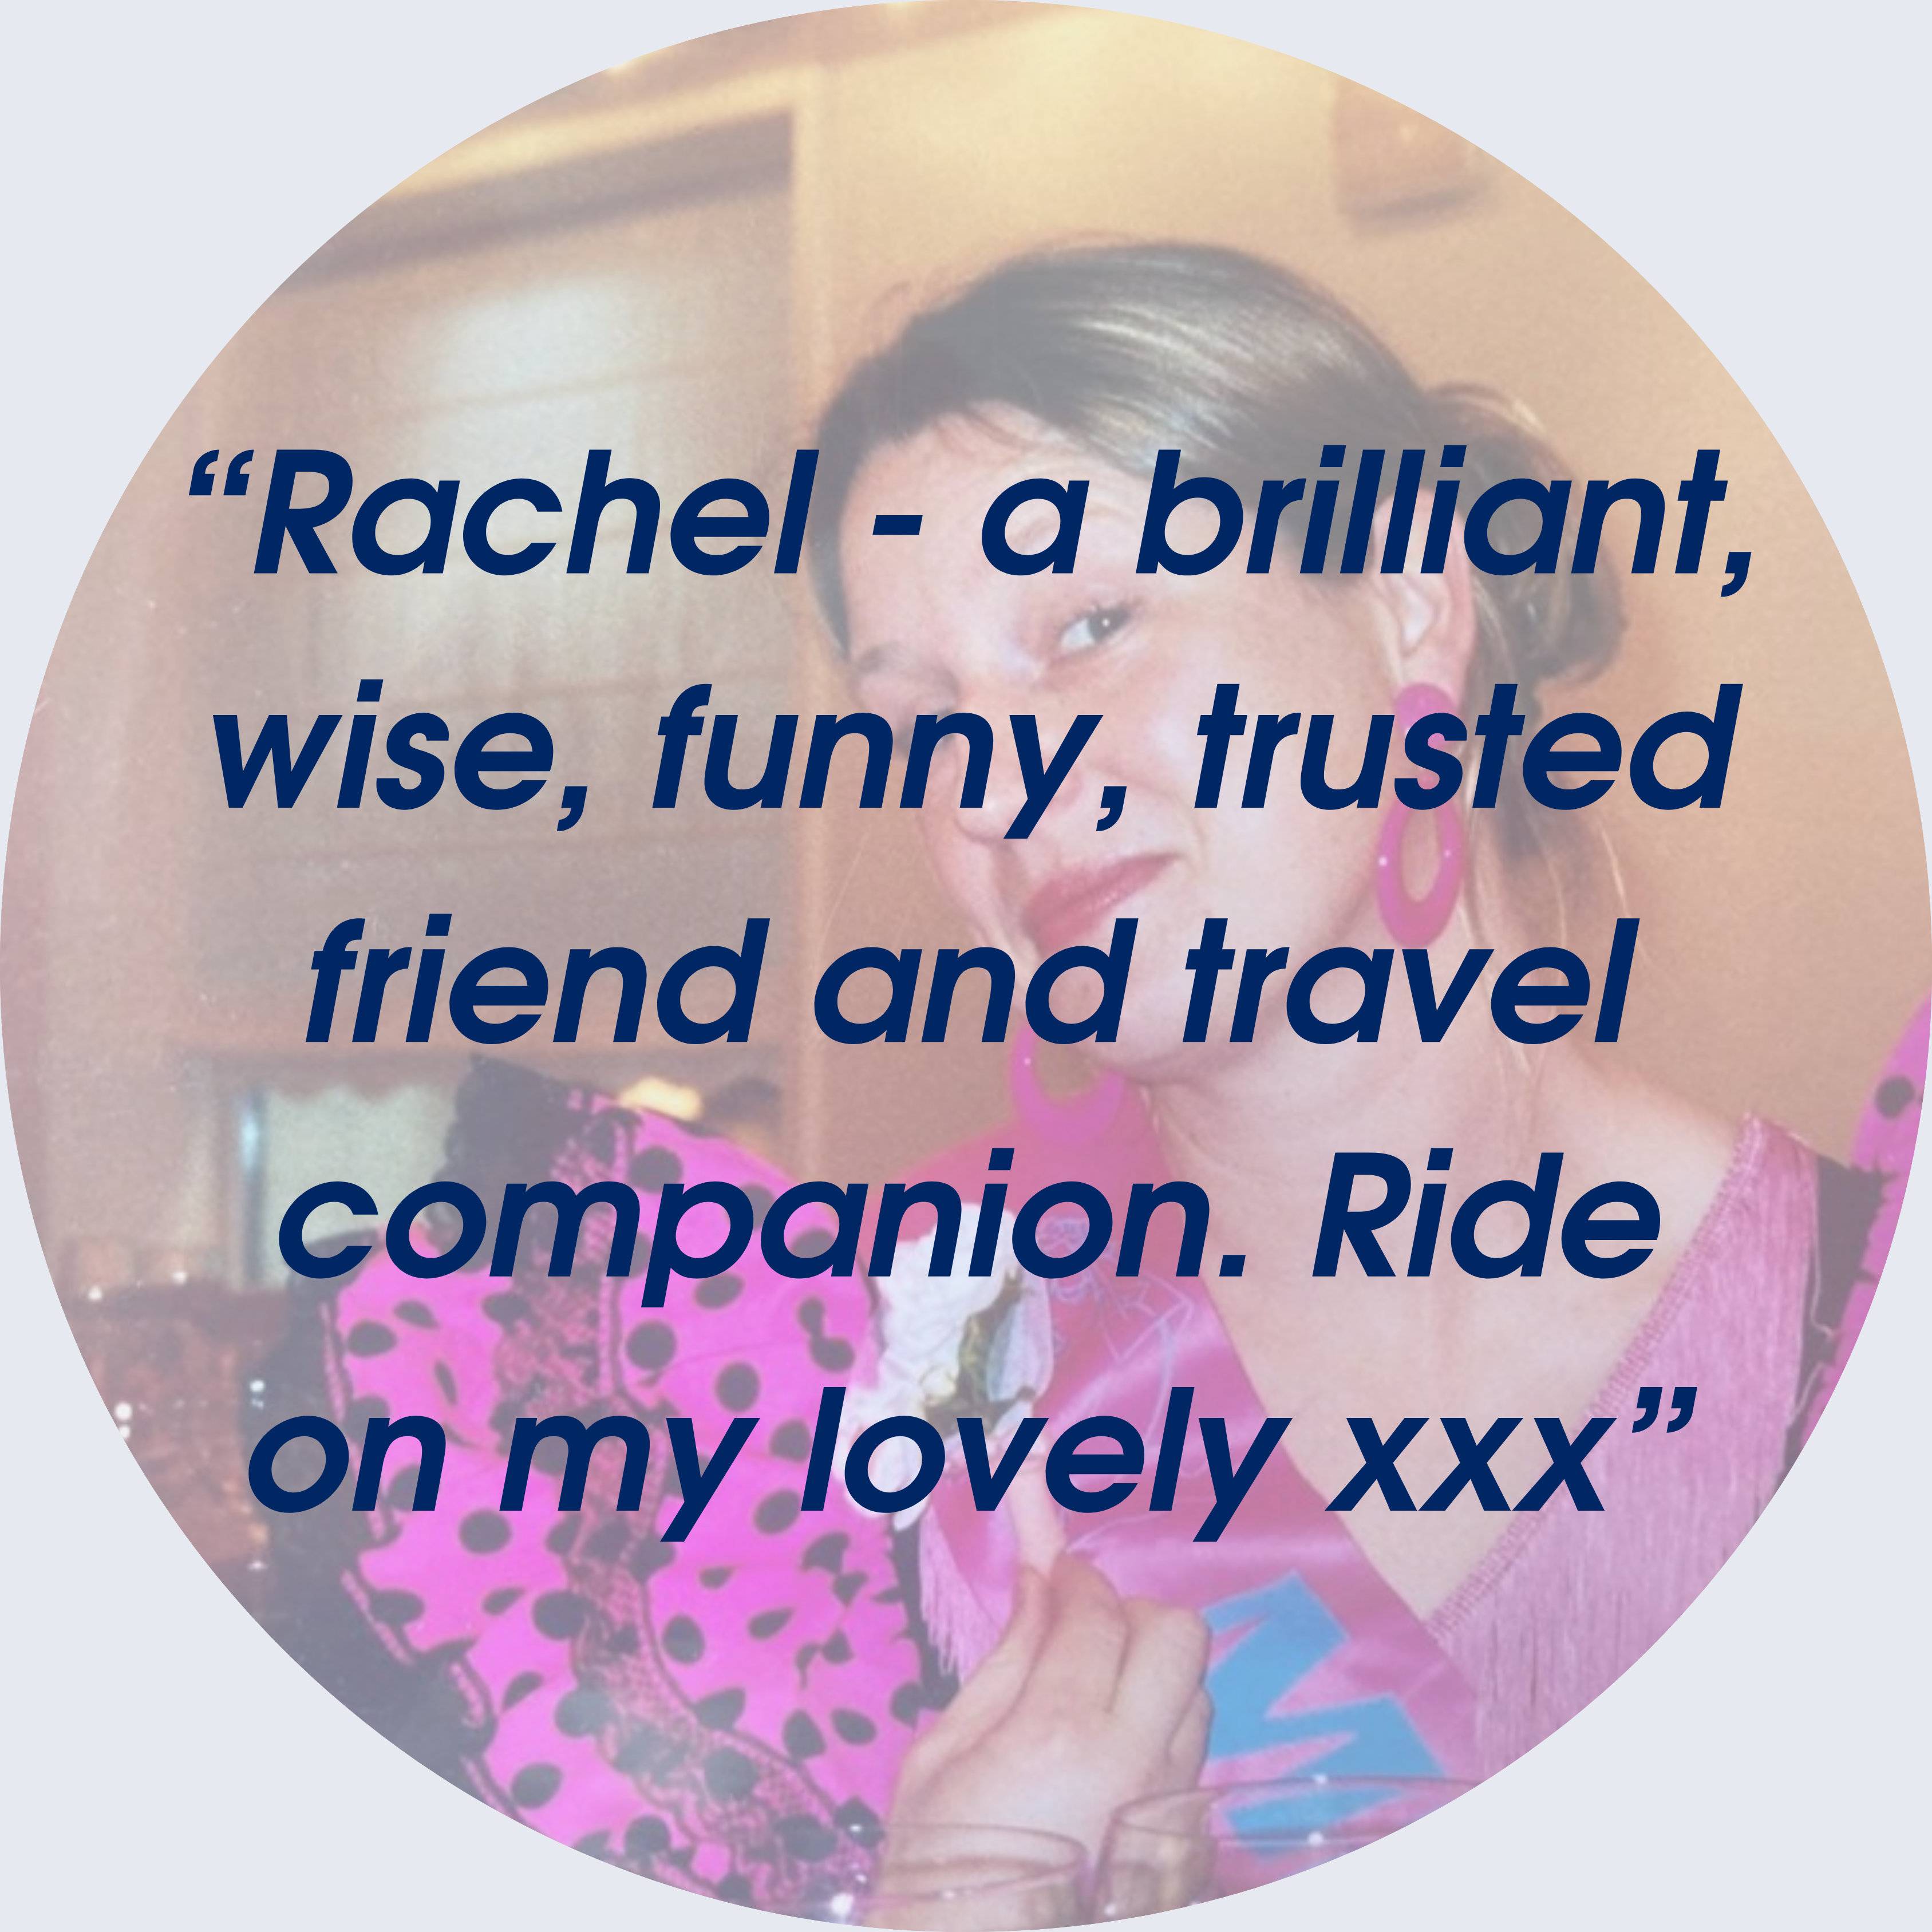 Rachel - a brilliant, wise, funny, trusted friend and travel companion. Ride on my lovely xxx